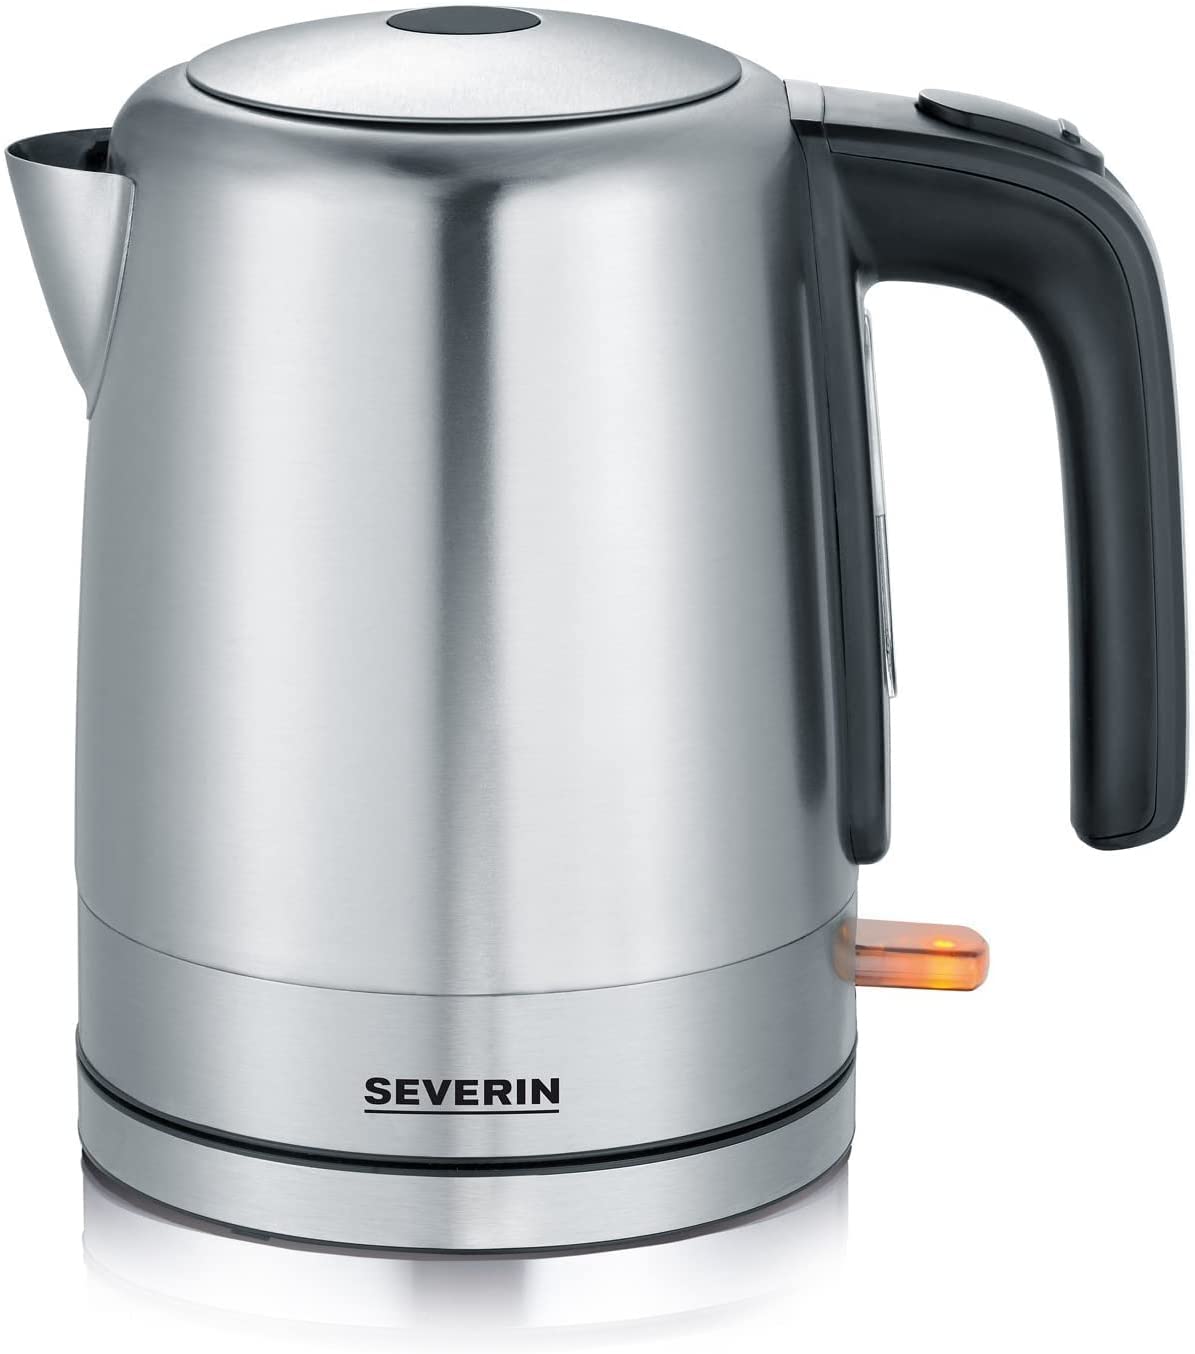 SEVERIN Kettle, Approx. 2200 W, 360° Central Cordless System, Large Lid Opening, Washable Limescale Filter, Kettle, 1,0 L, black/silver